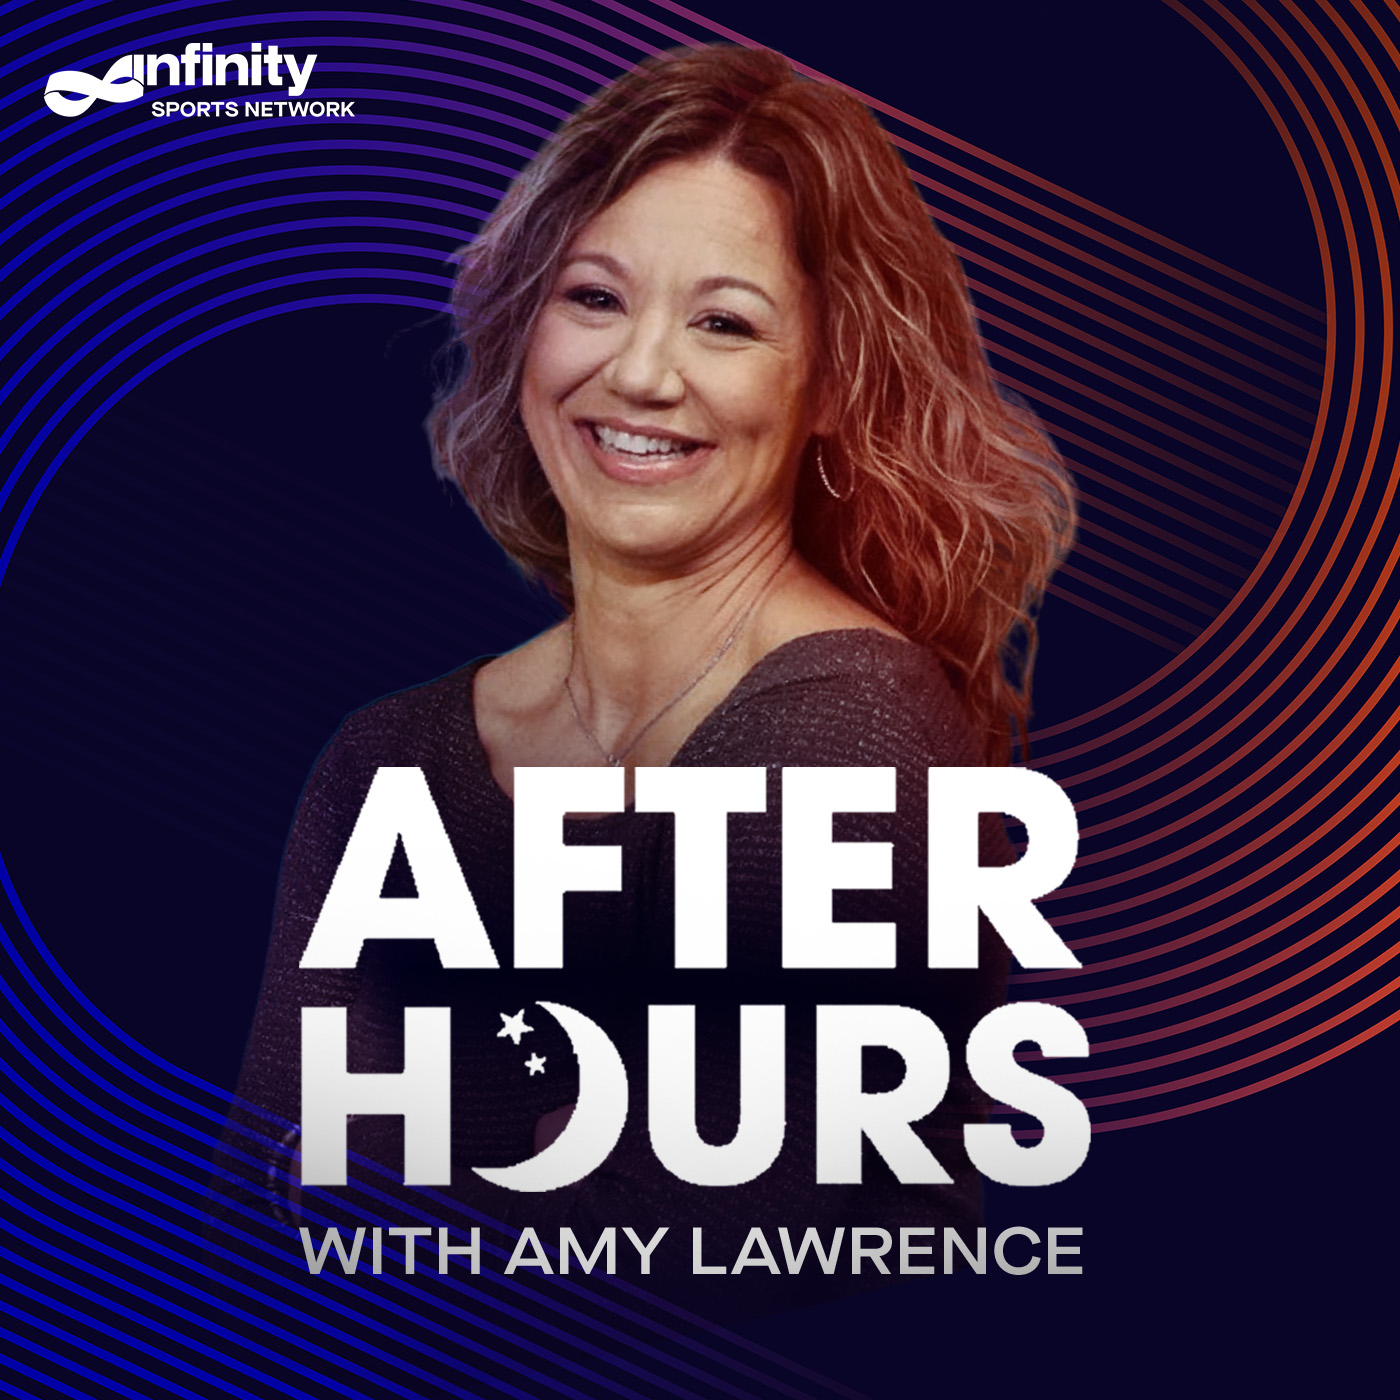 12-7-21 After Hours with Amy Lawrence PODCAST: Hour 1